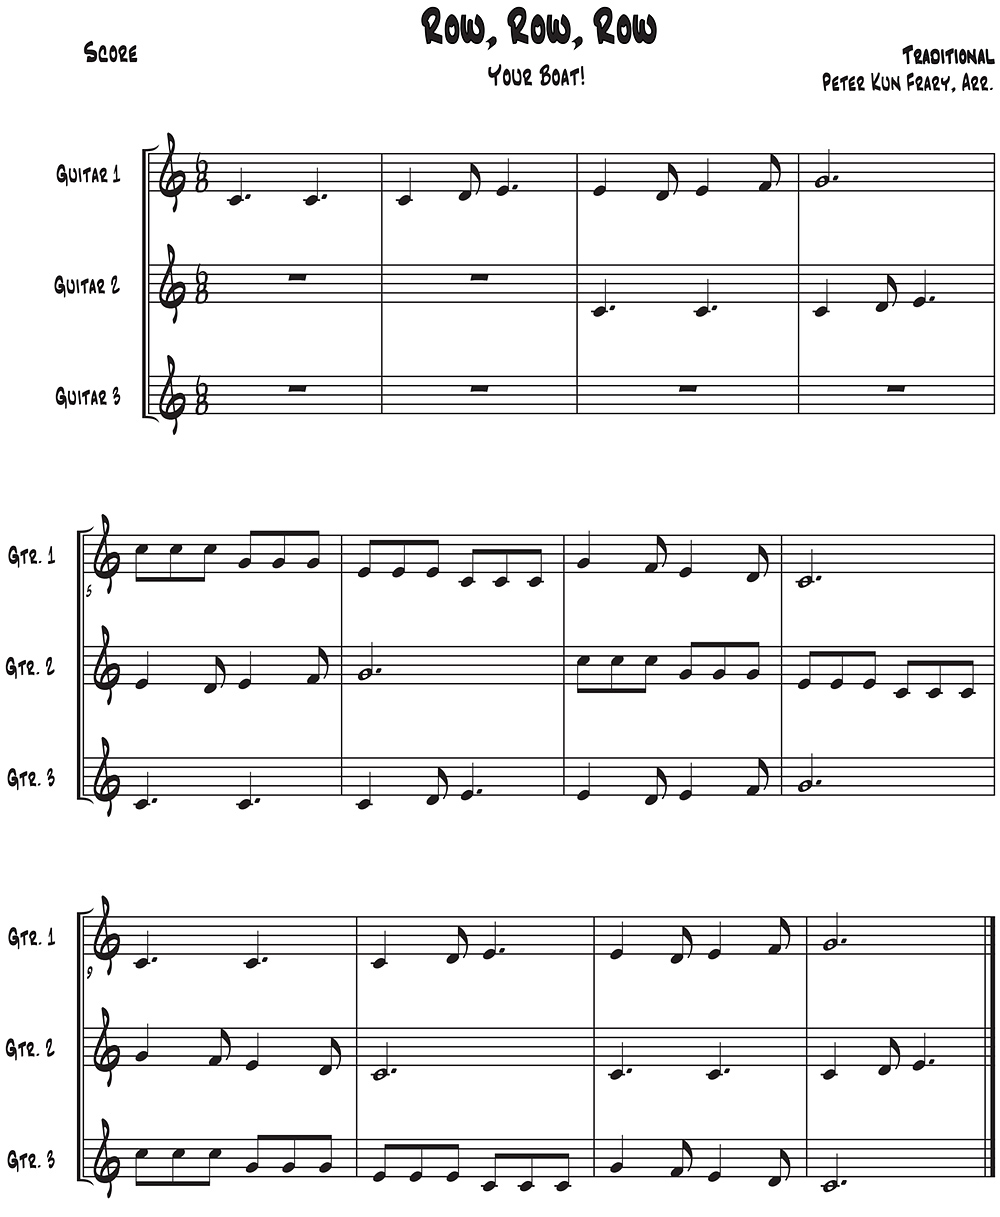 example of polyphonic music